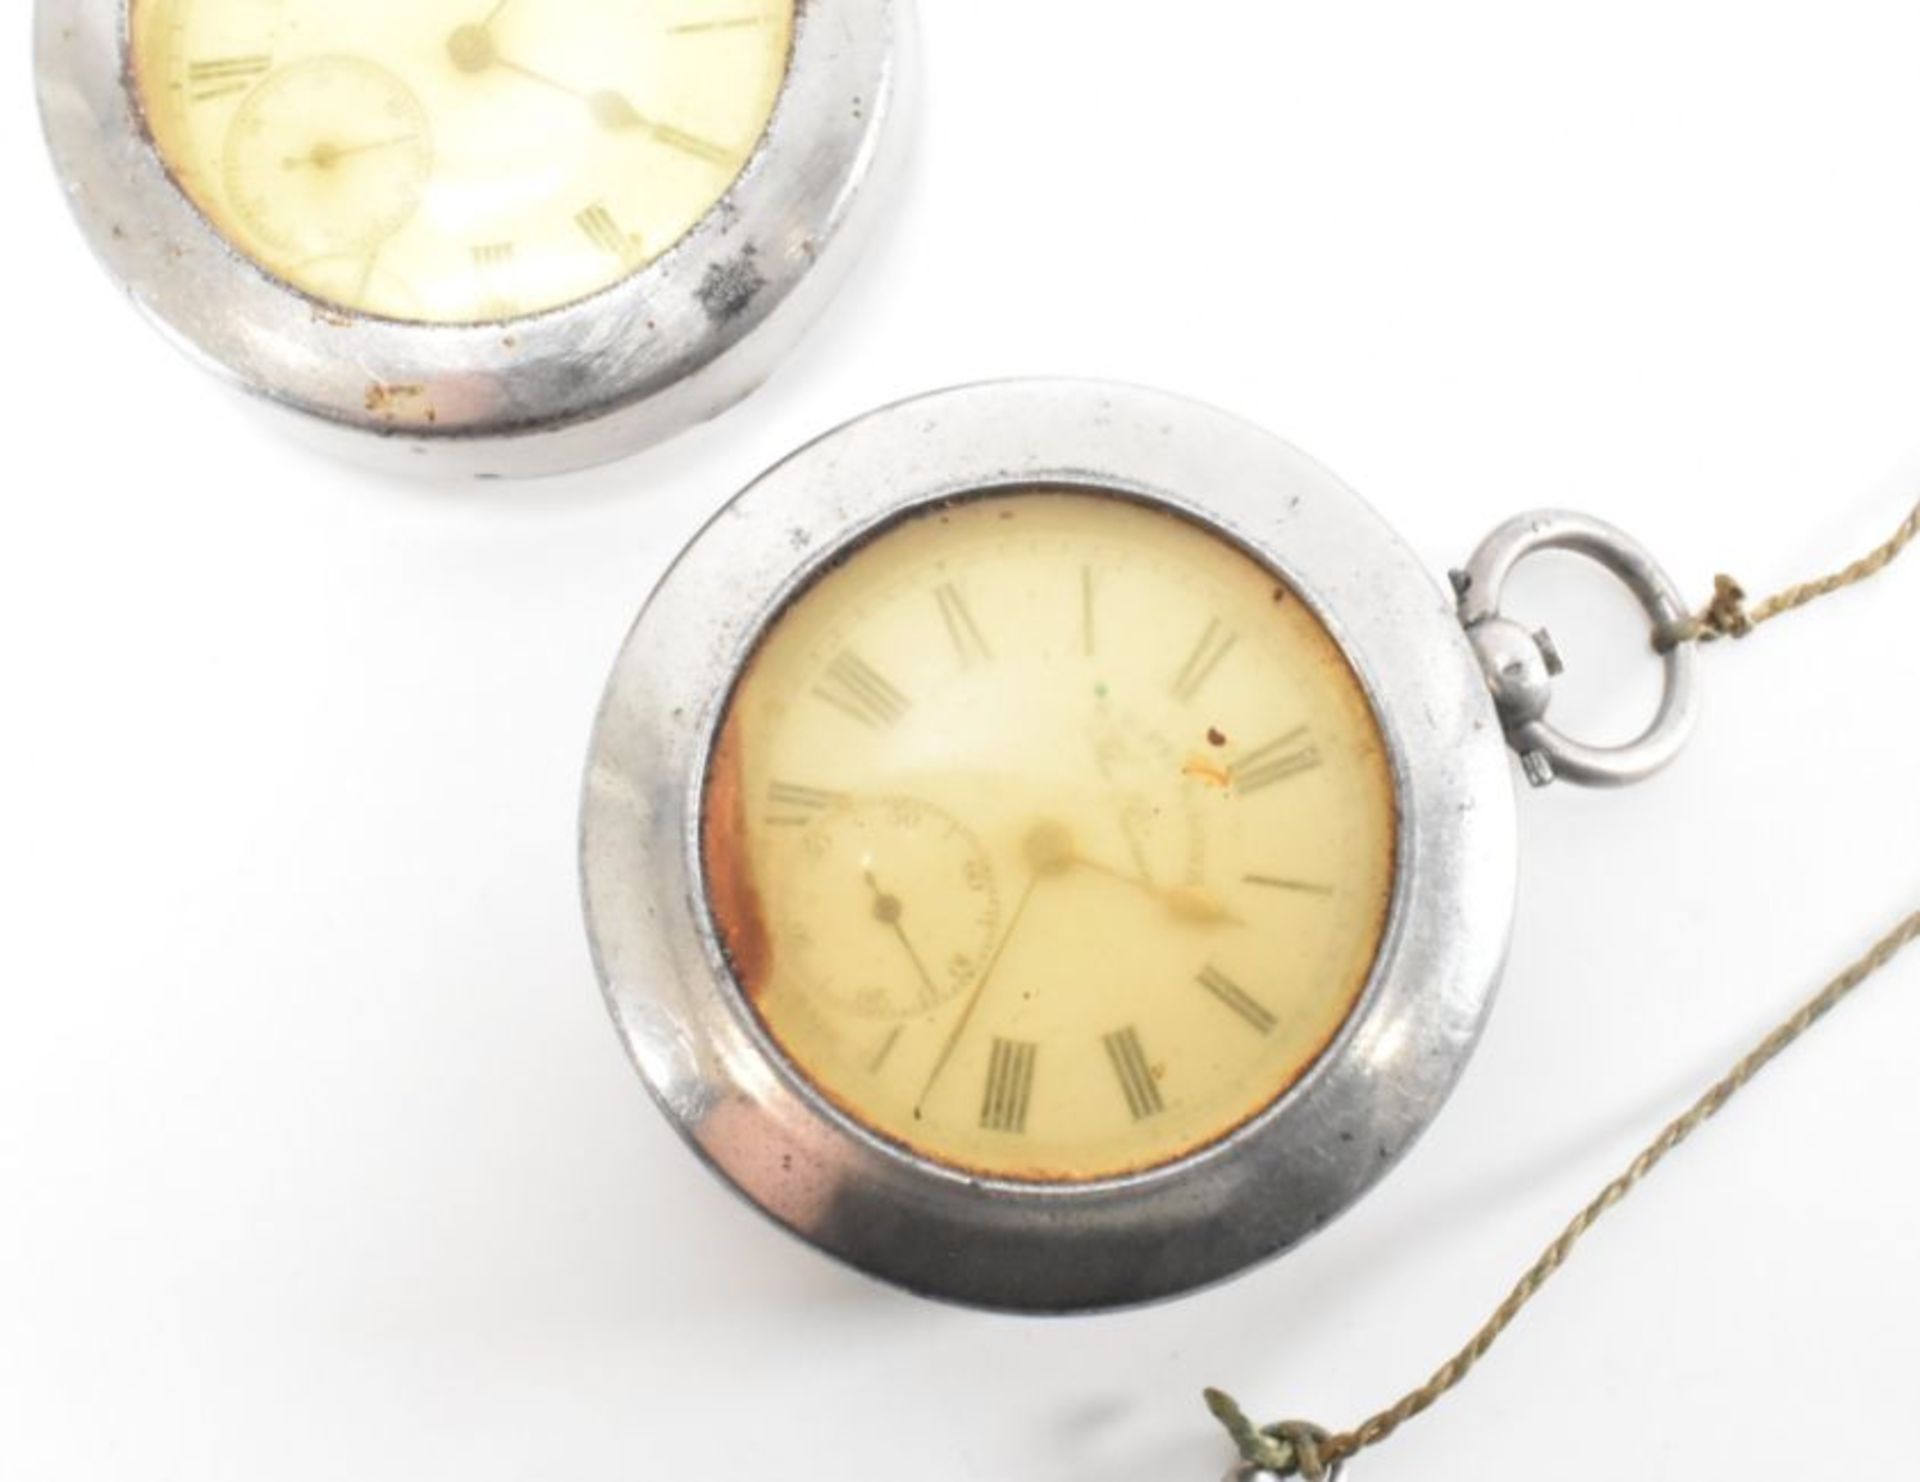 TWO POCKET WATCHES - HE PECK & LABRADOR - Image 3 of 6